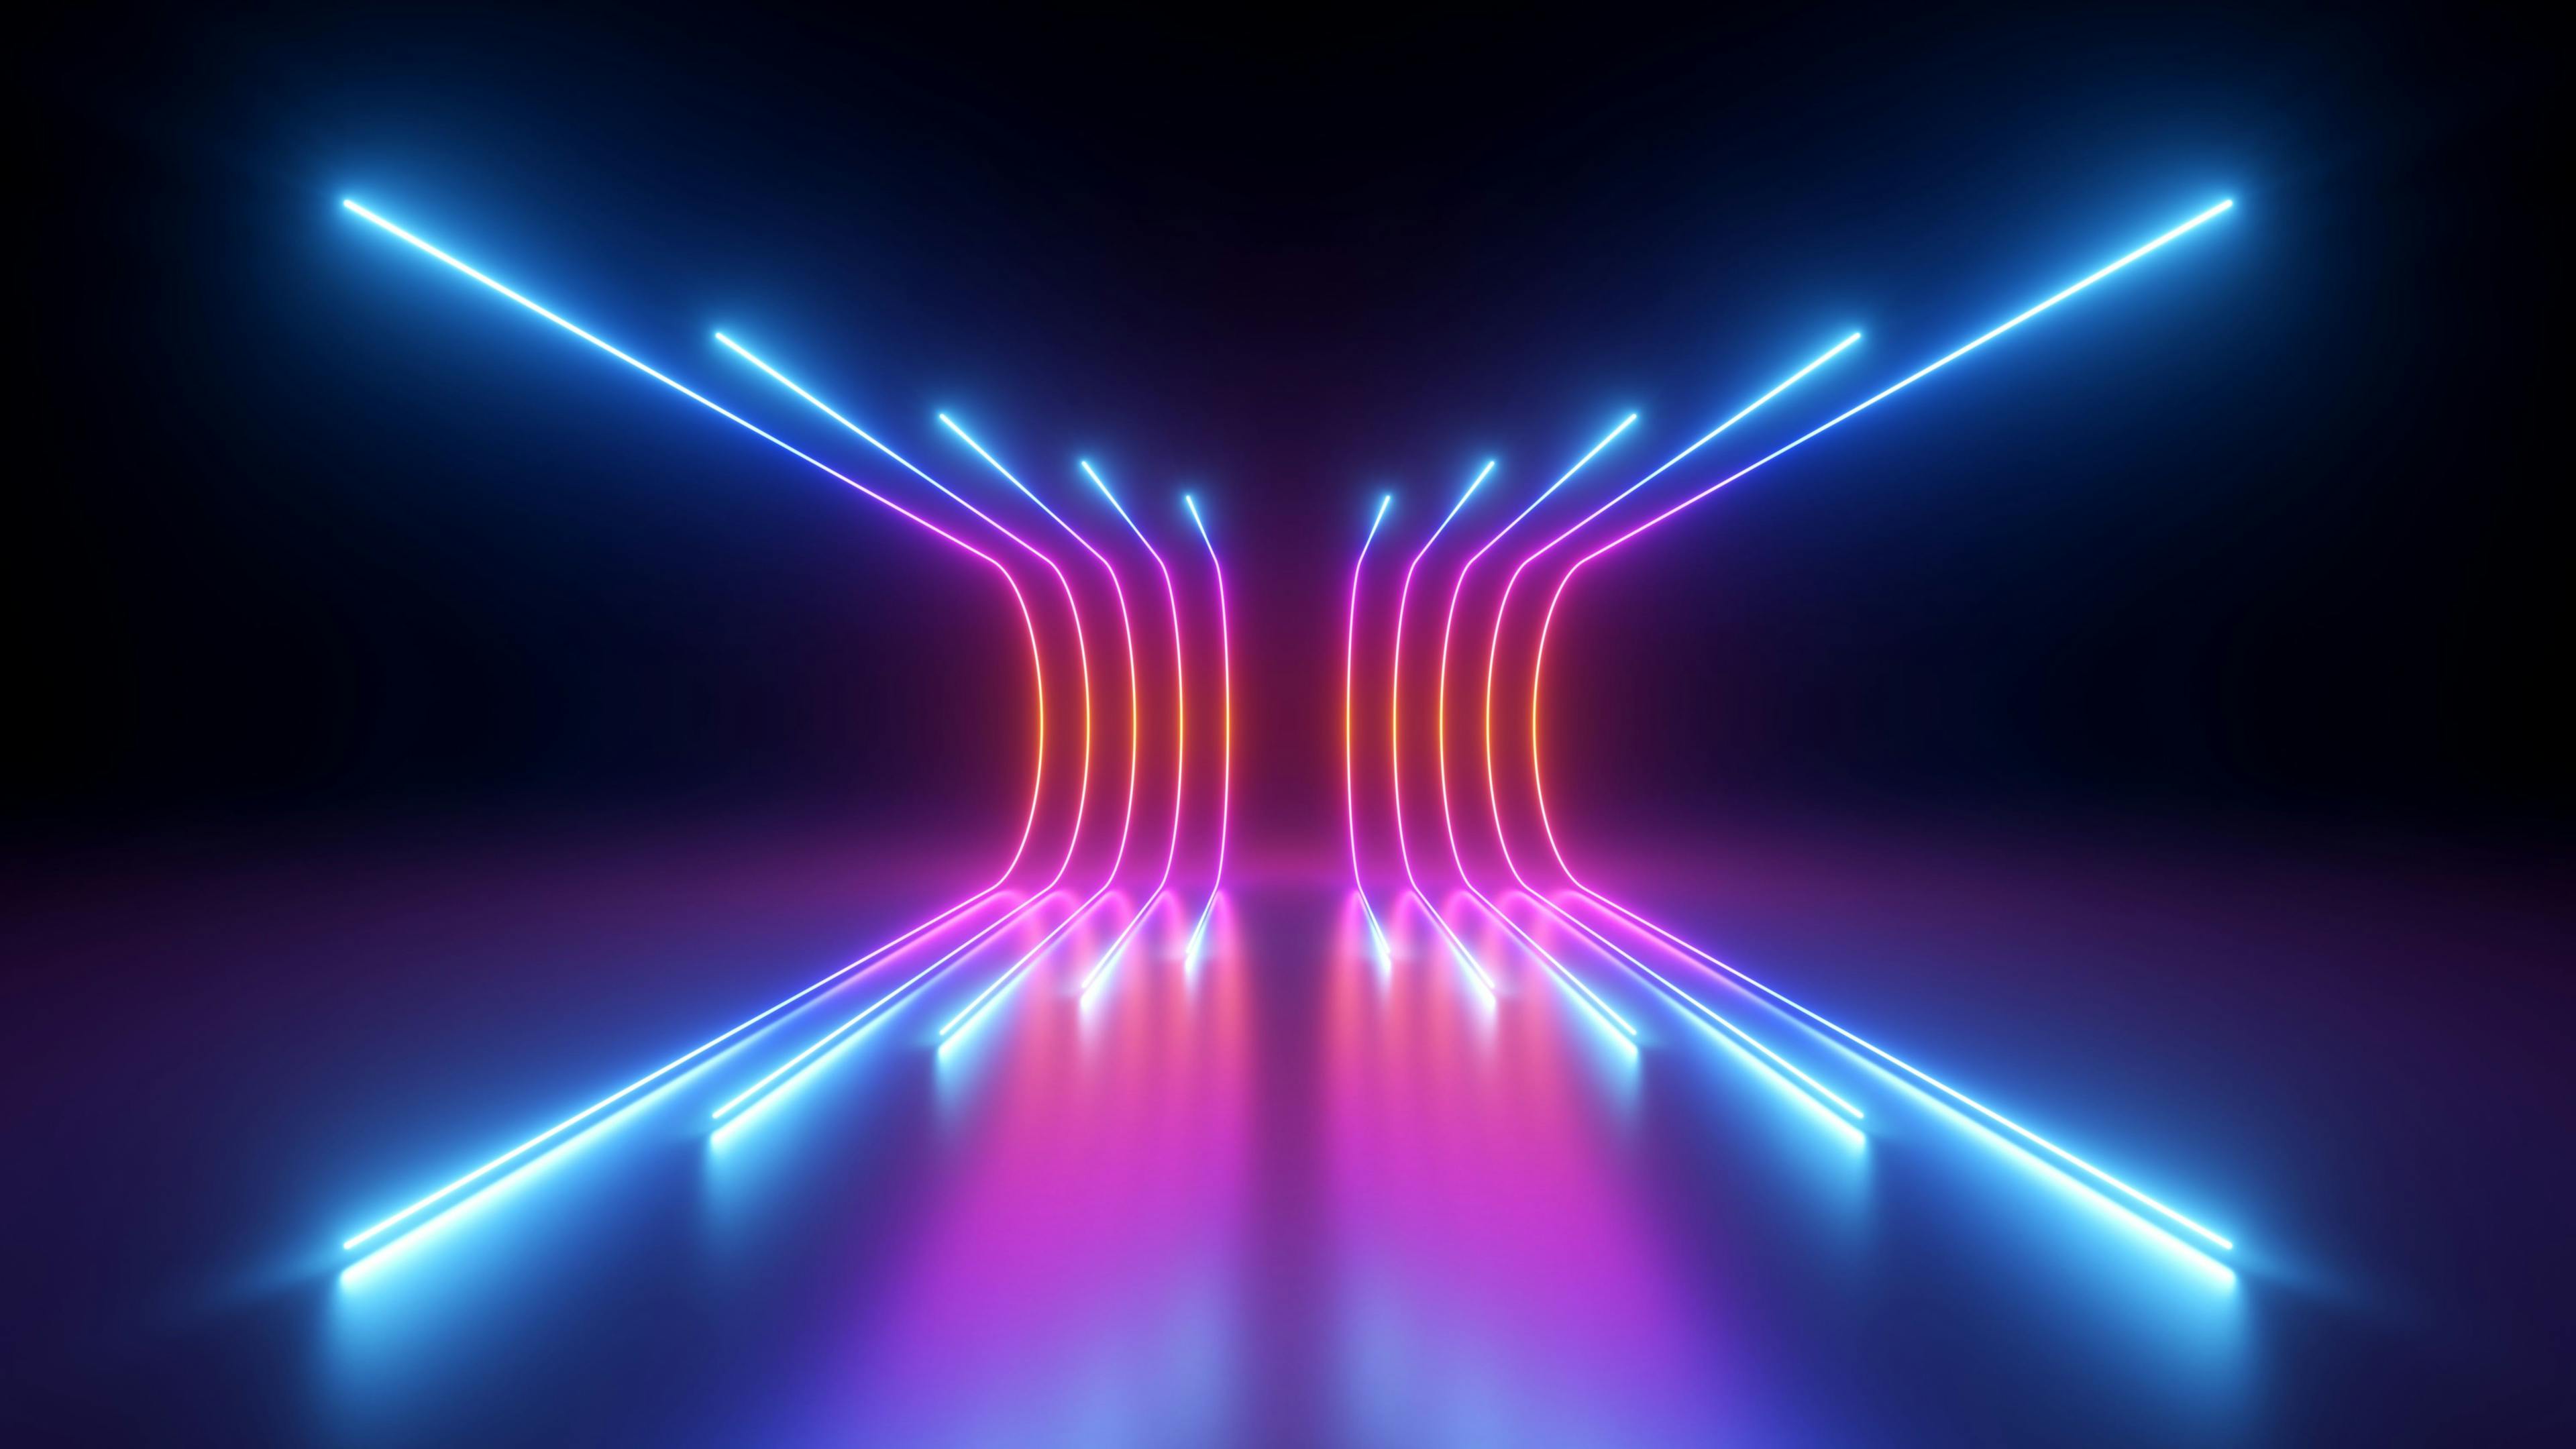 3d rendering, rounded pink blue neon lines, glowing in the dark. Abstract minimalist geometric background. Ultraviolet spectrum. Cyber space. Futuristic wallpaper | Image Credit: © wacomka - stock.adobe.com